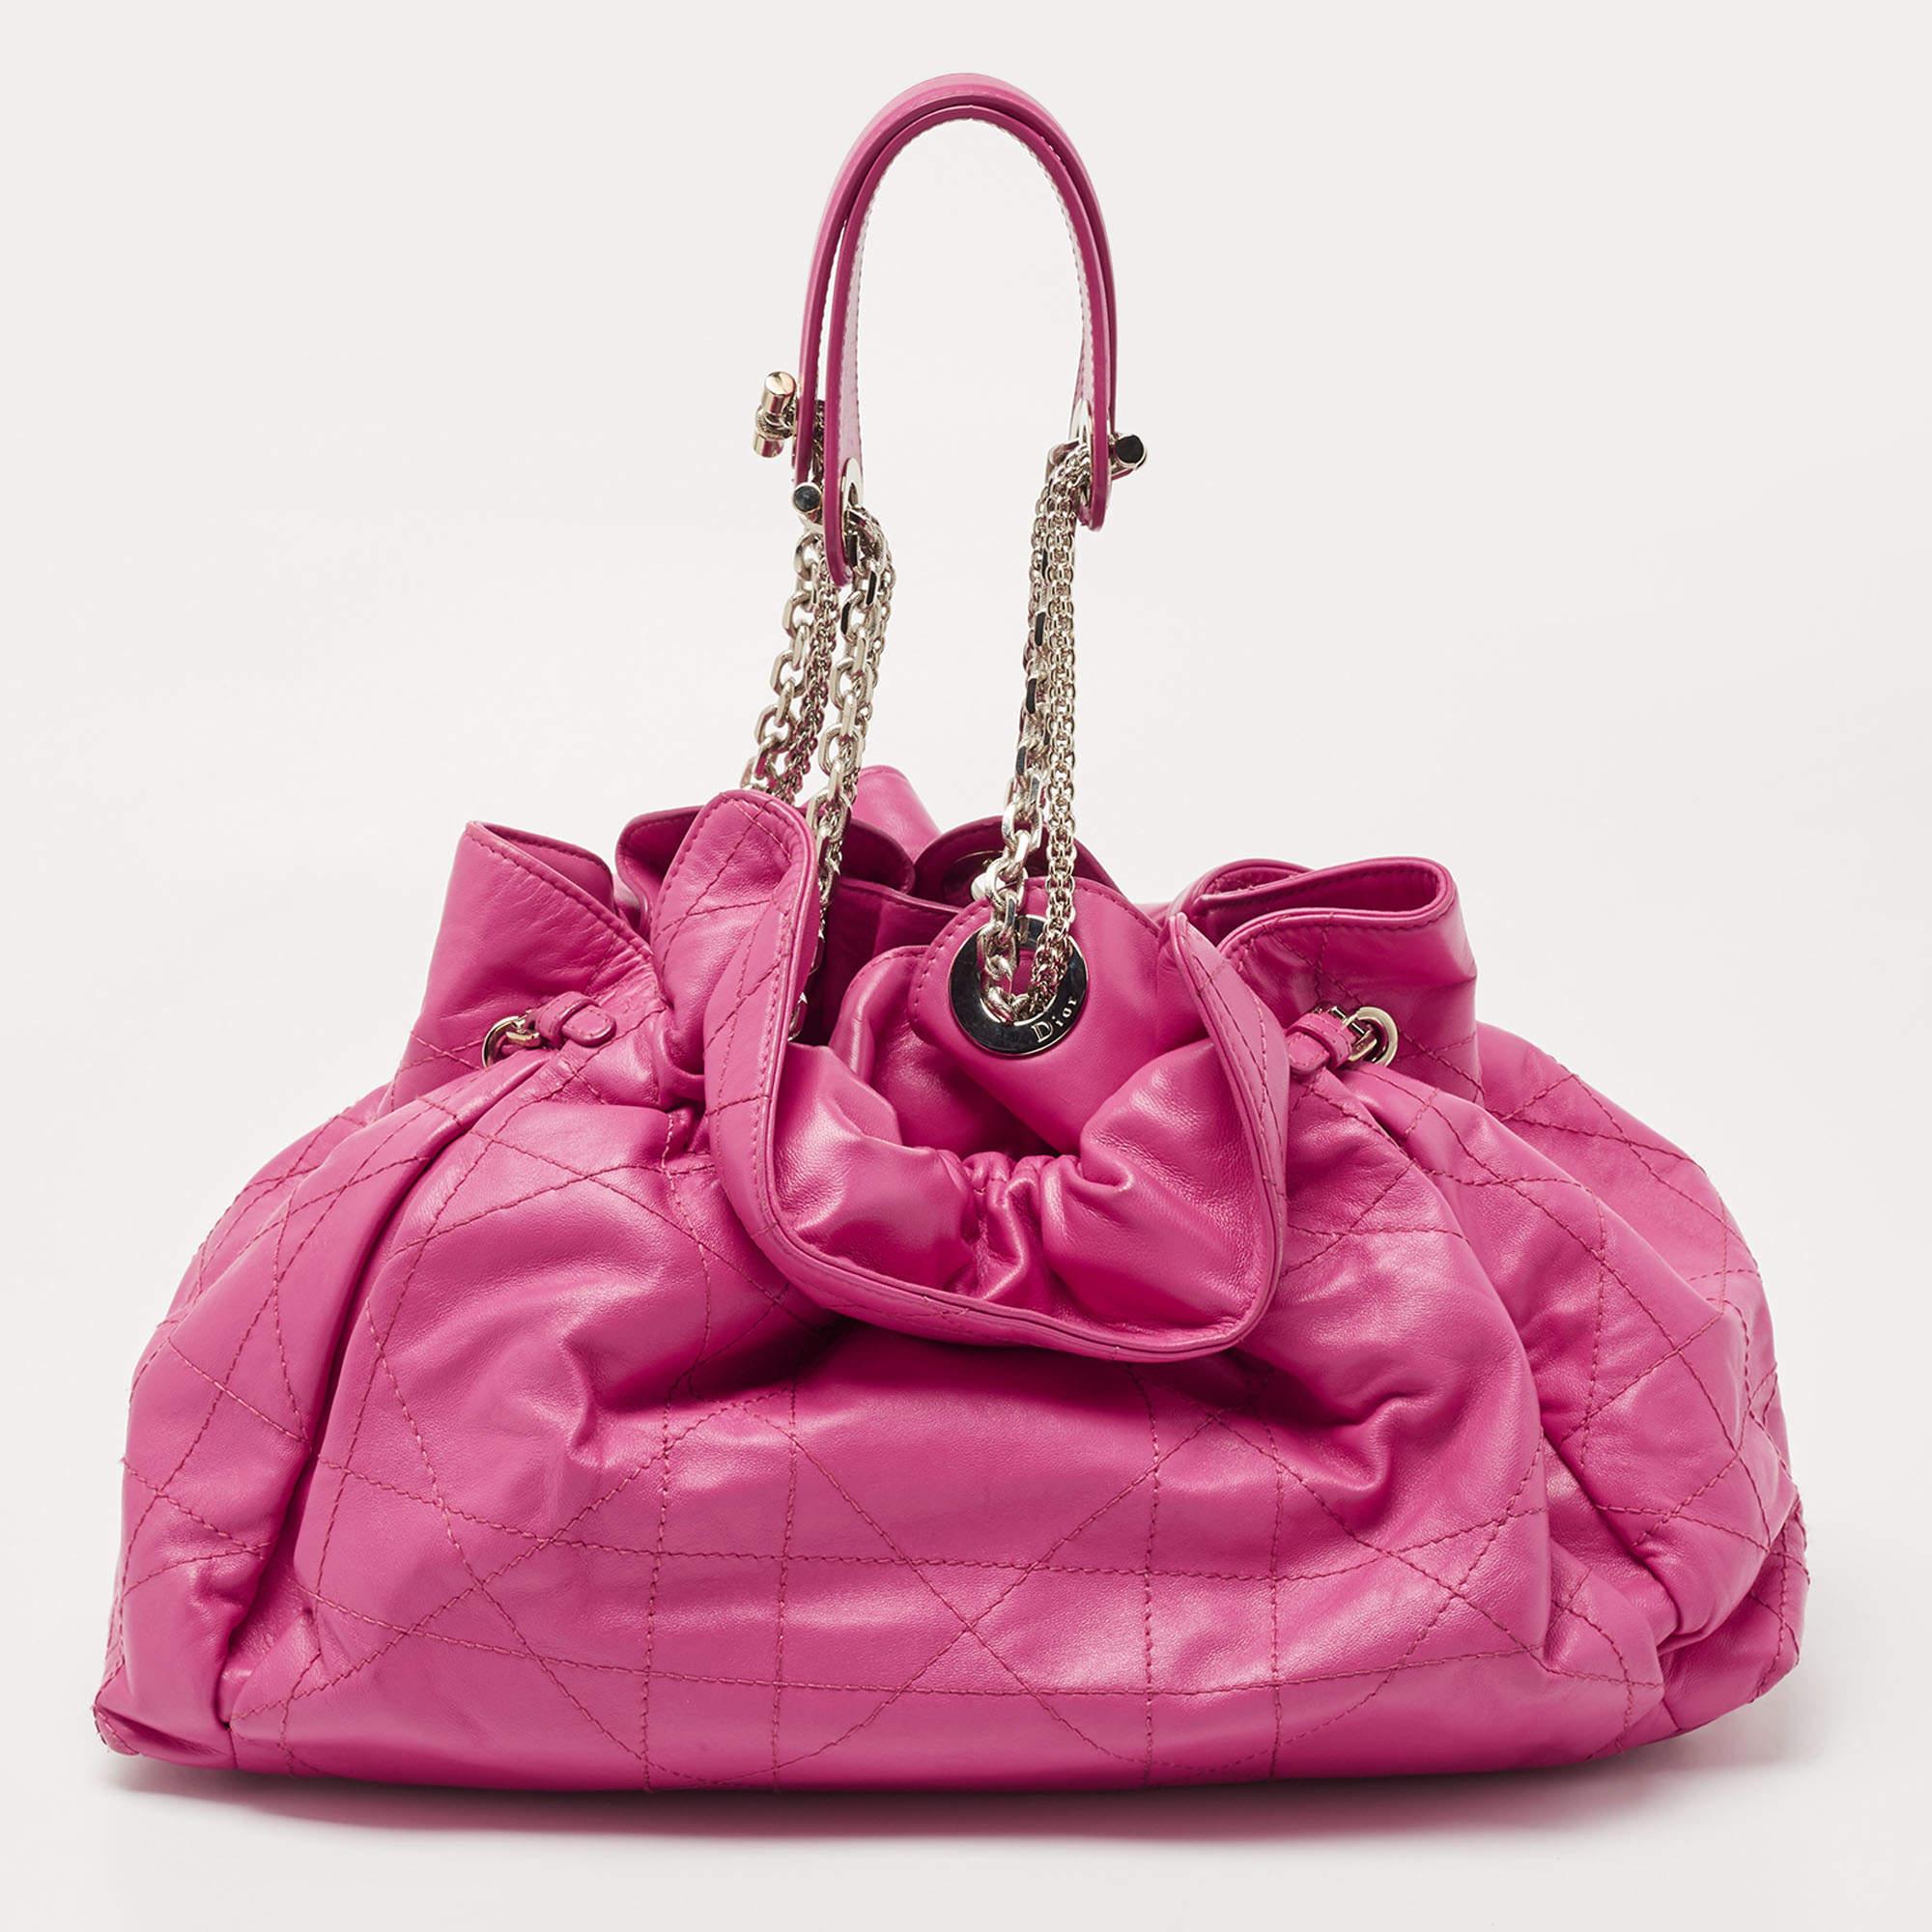 Stylish handbags never fail to make a fashionable impression. Make this designer hobo yours by pairing it with your sophisticated workwear as well as chic casual looks.

Includes: Original Dustbag, Authenticity Card, Info Booklet

